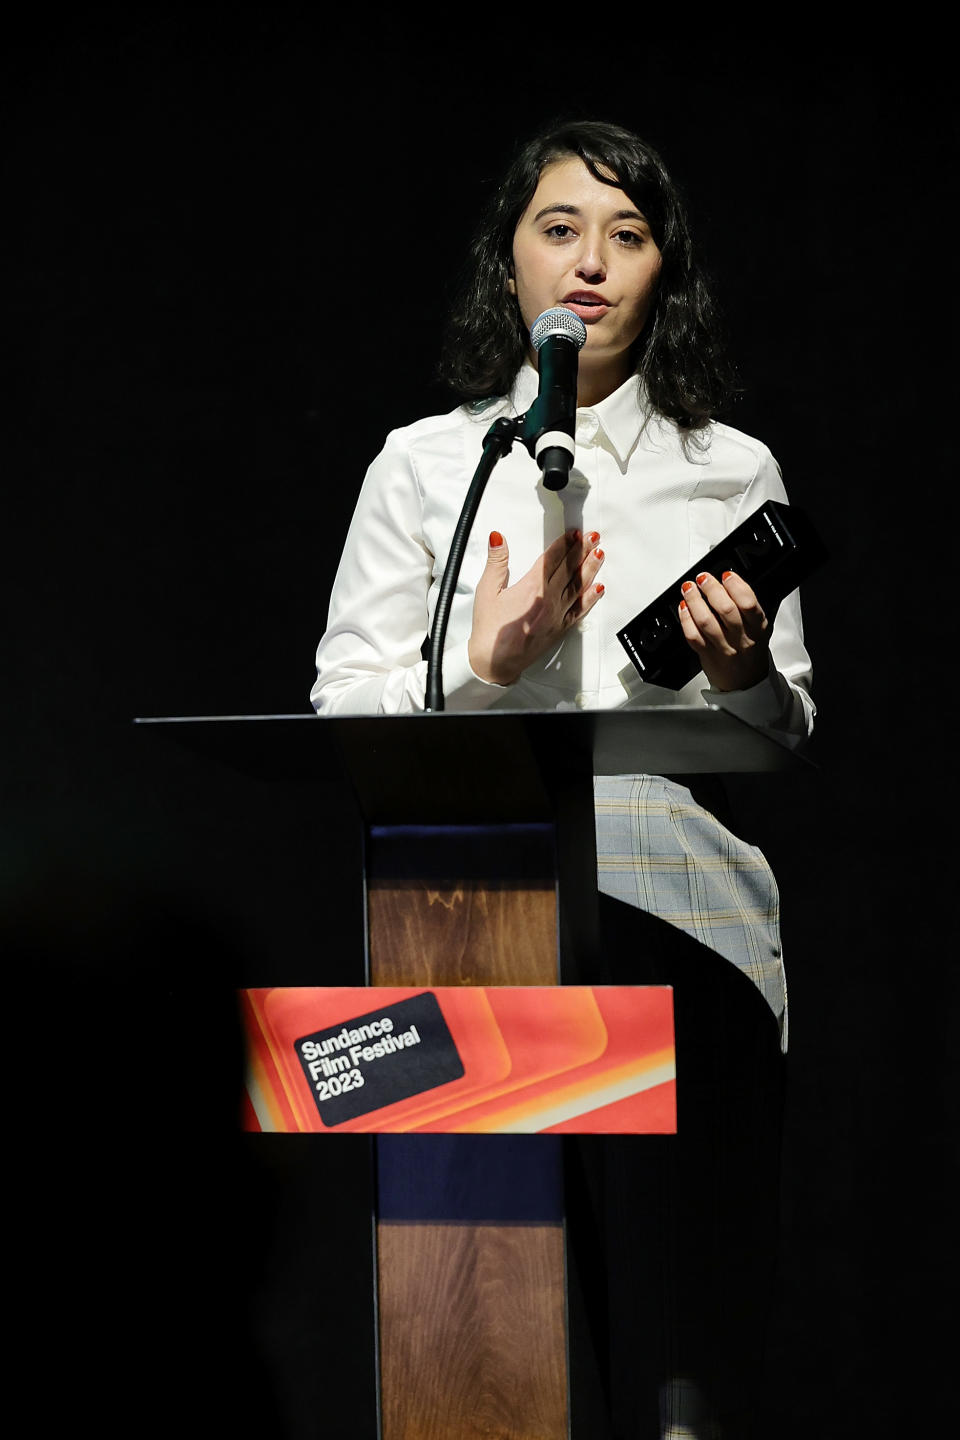 PARK CITY, UTAH - JANUARY 27: Noora Niasari accepts The Audience Award: World Cinema Dramatic, Presented for 'SHAYDA' during the 2023 Sundance Film Festival Awards Ceremony at The Ray Theatre on January 27, 2023 in Park City, Utah. (Photo by Michael Loccisano/Getty Images)